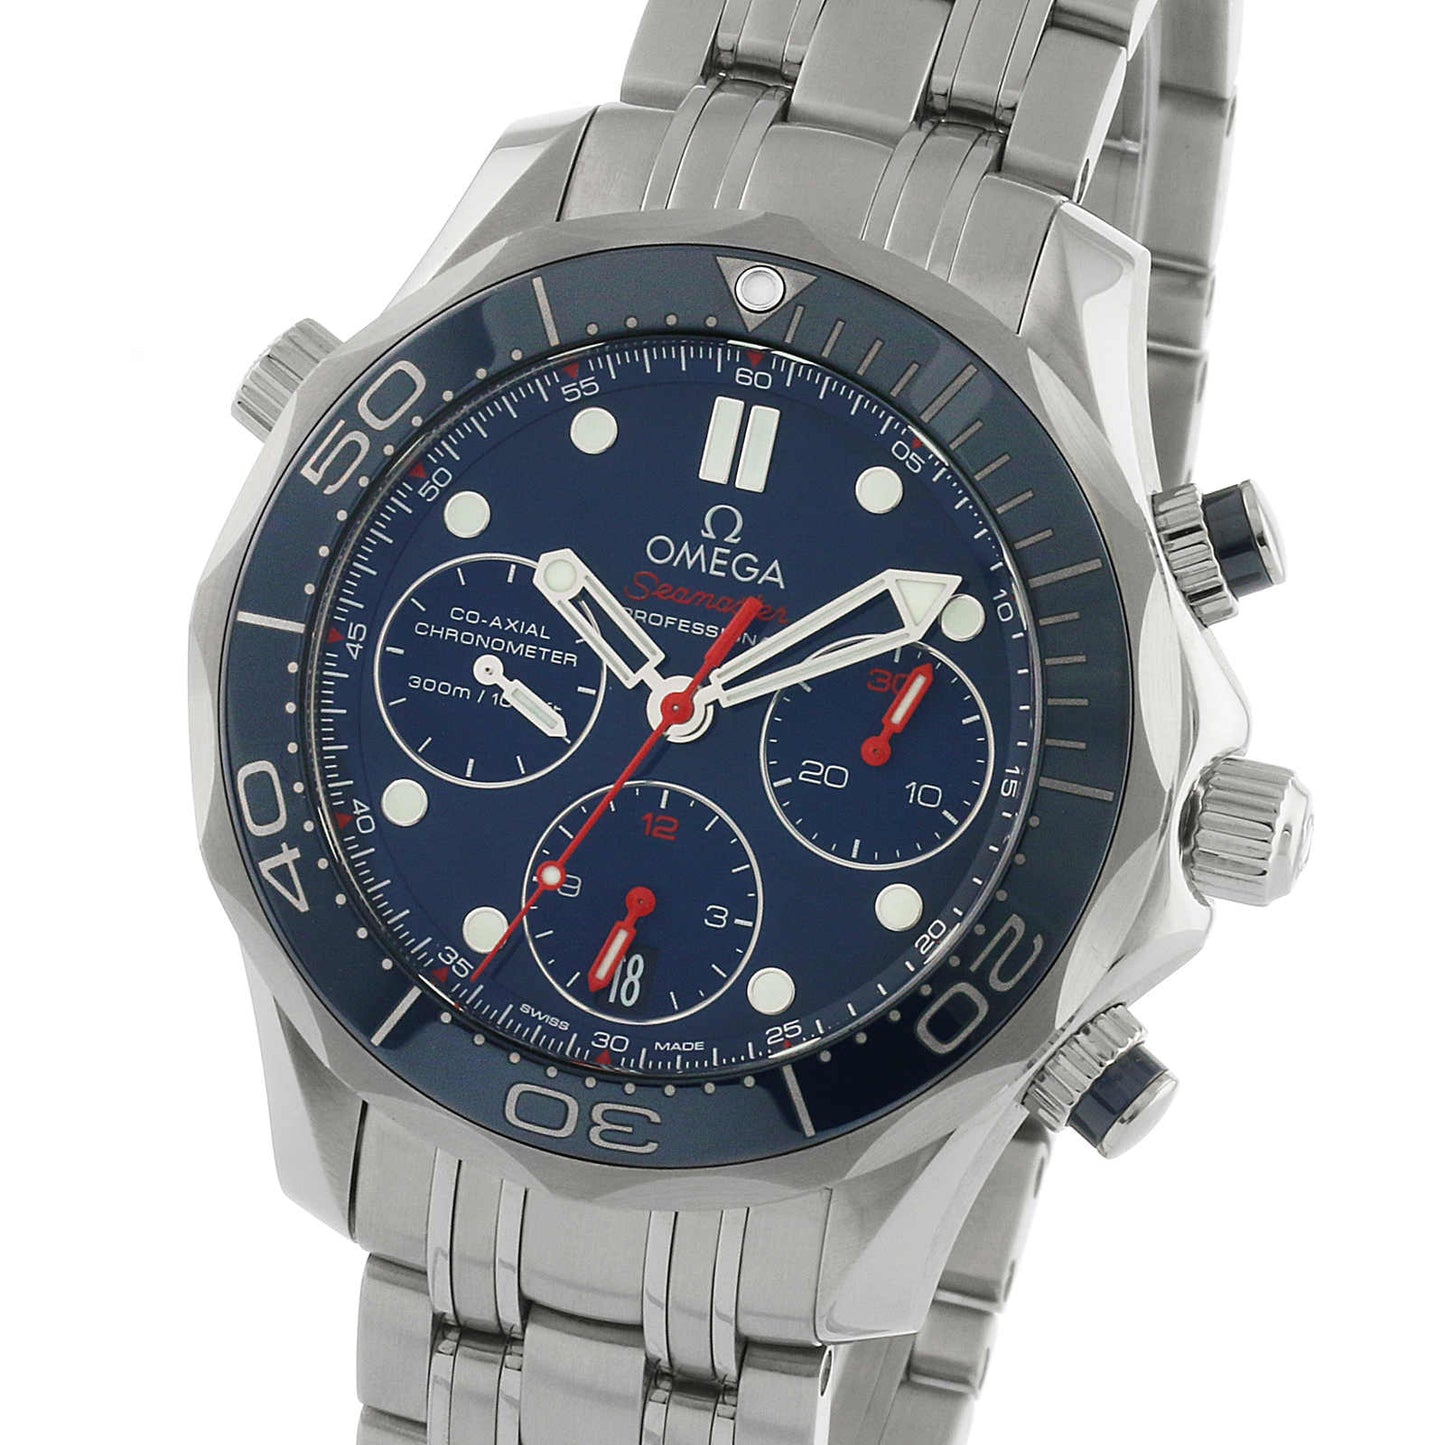 Omega Seamaster Diver 300m Co-Axial